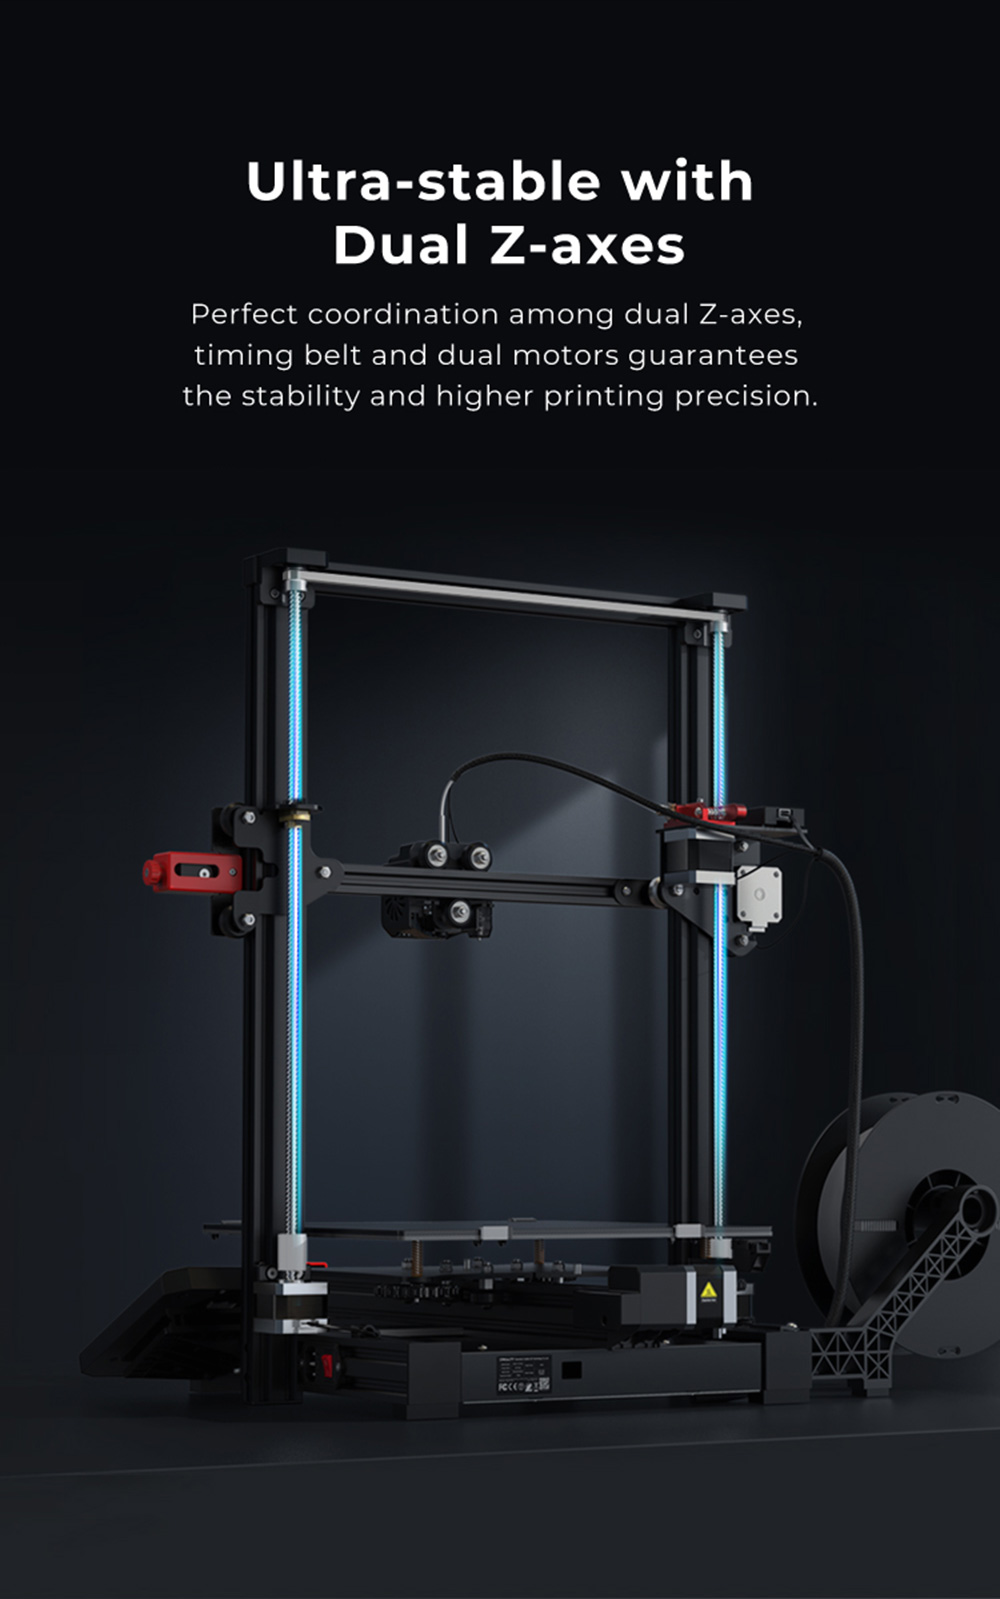 Creality Ender-3 Max Neo 3D Printer, CR Touch Auto-leveling, Stable Dual Z-axis, Resume Printing, 32-bit Silent Mainboard, 300x300x320mm